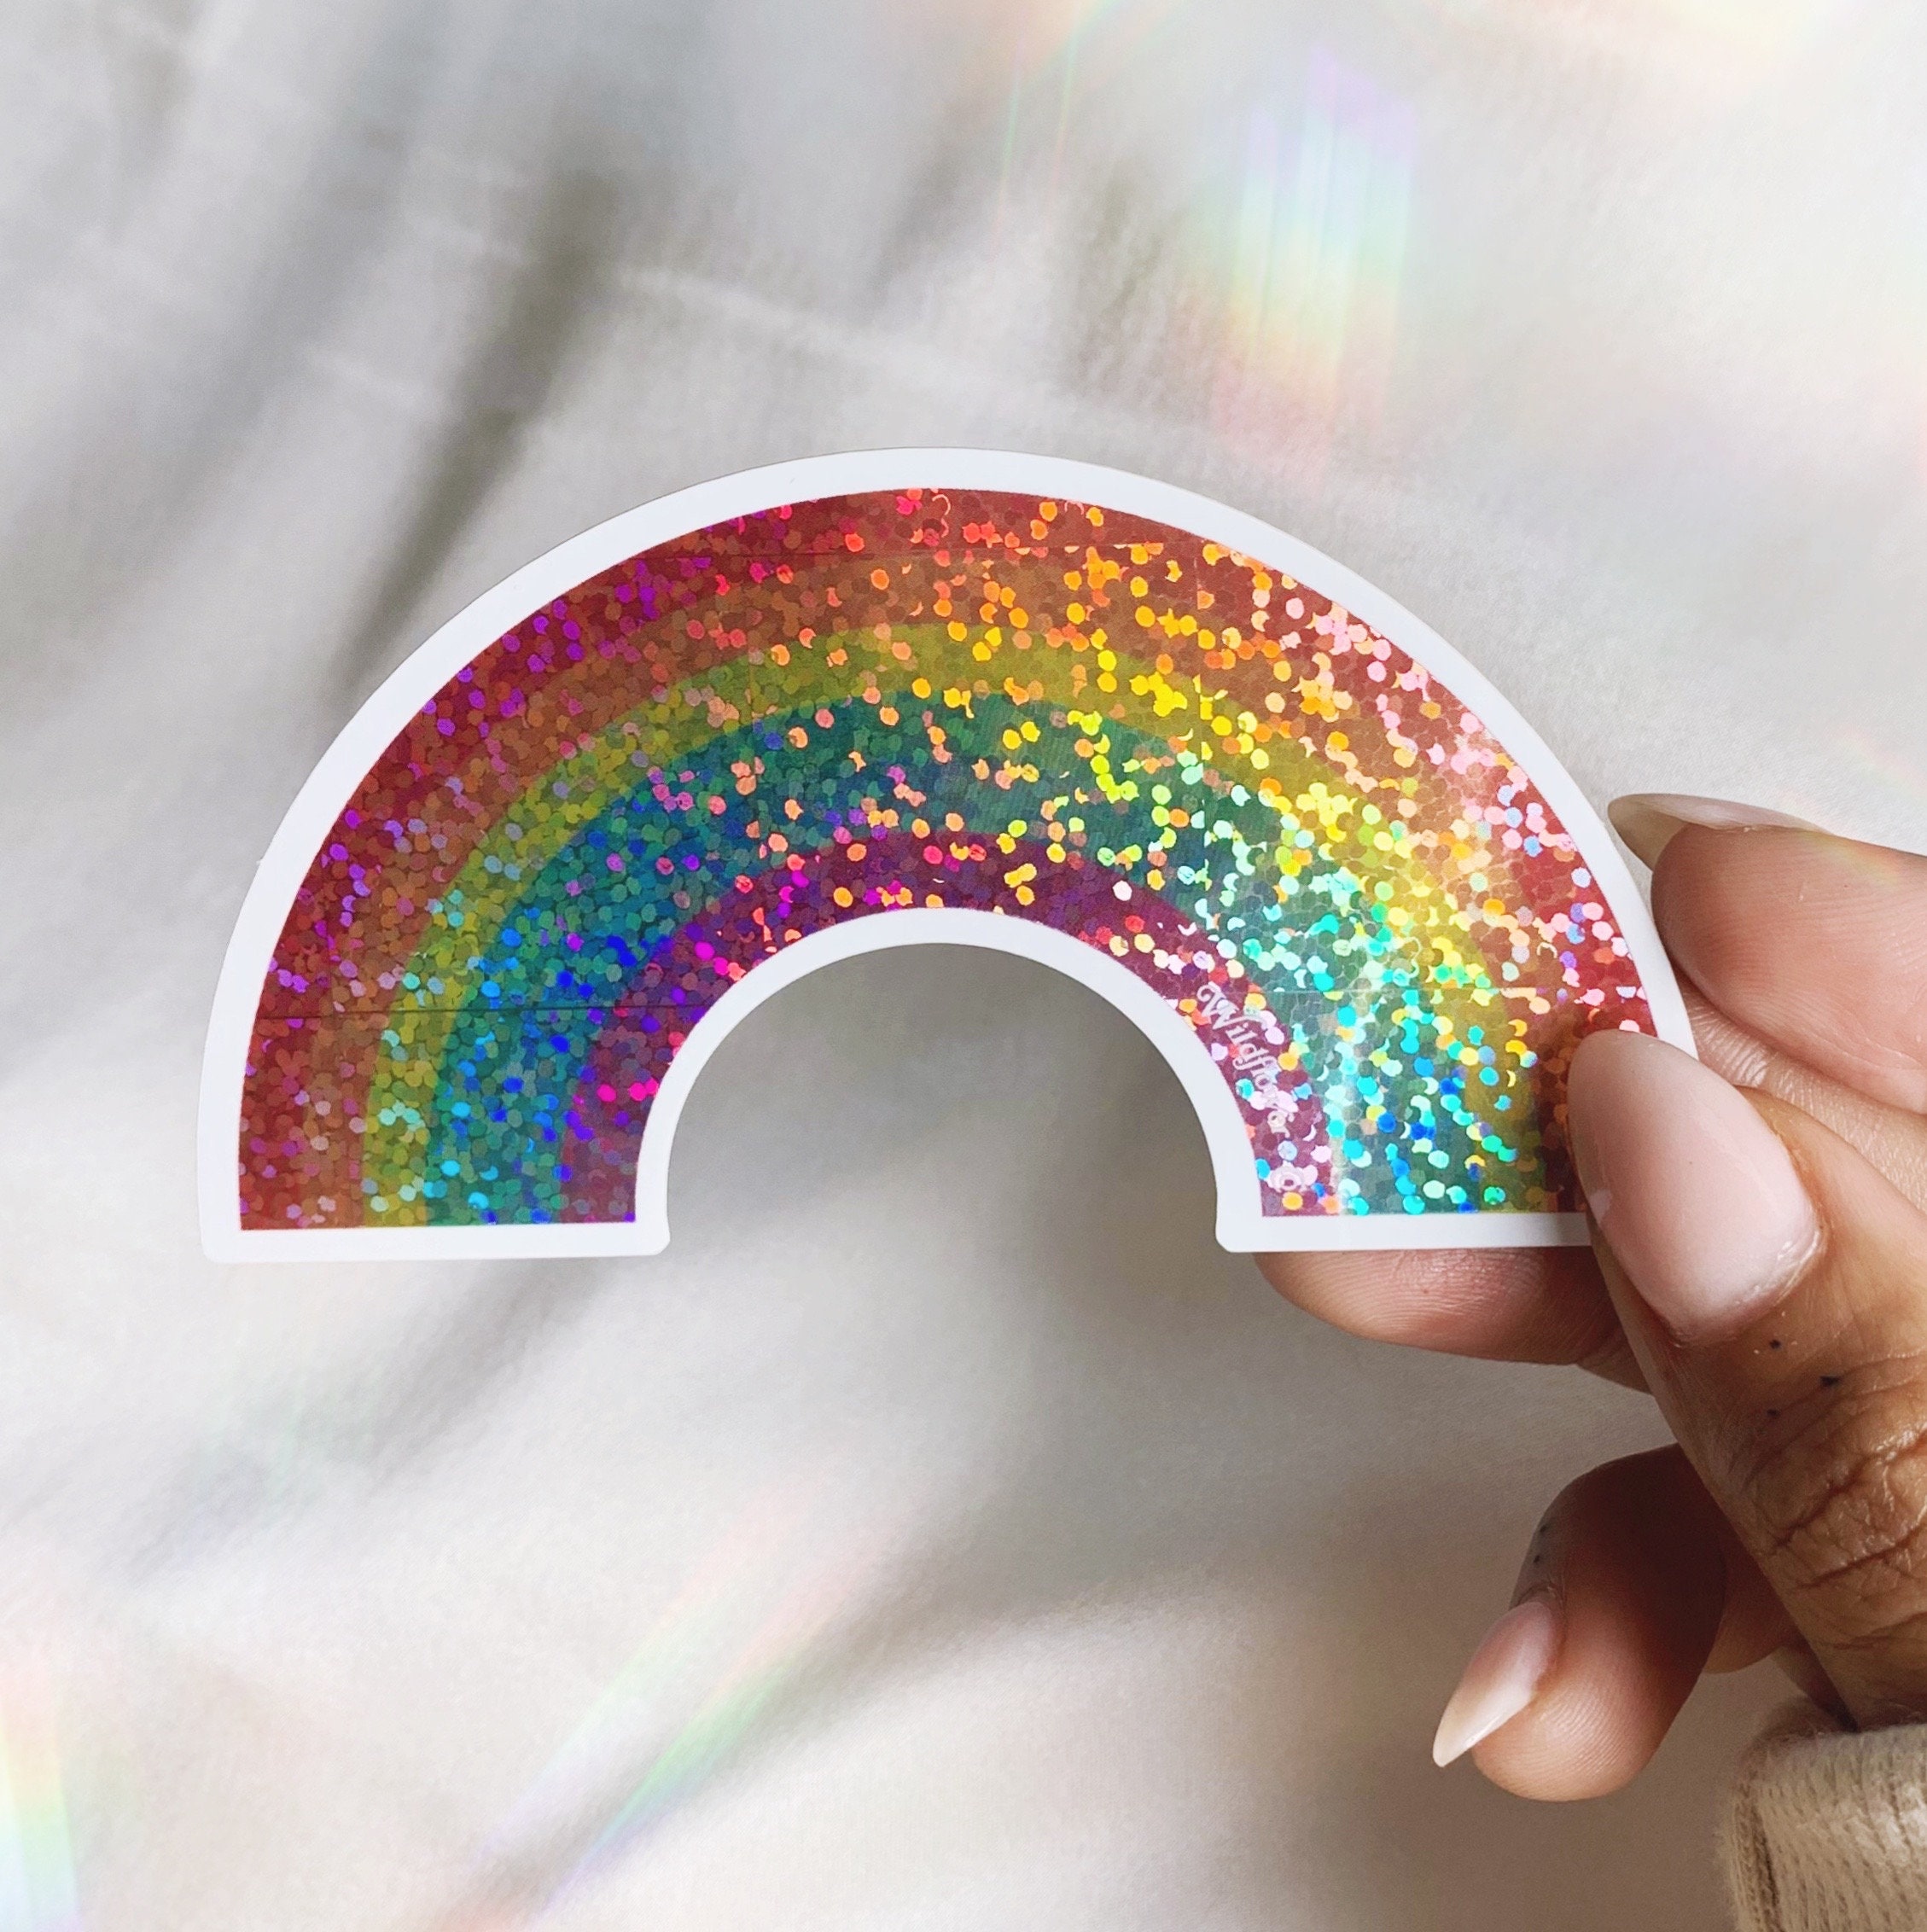 Ooly Stickiville Rainbow Letters Stickers - Holographic